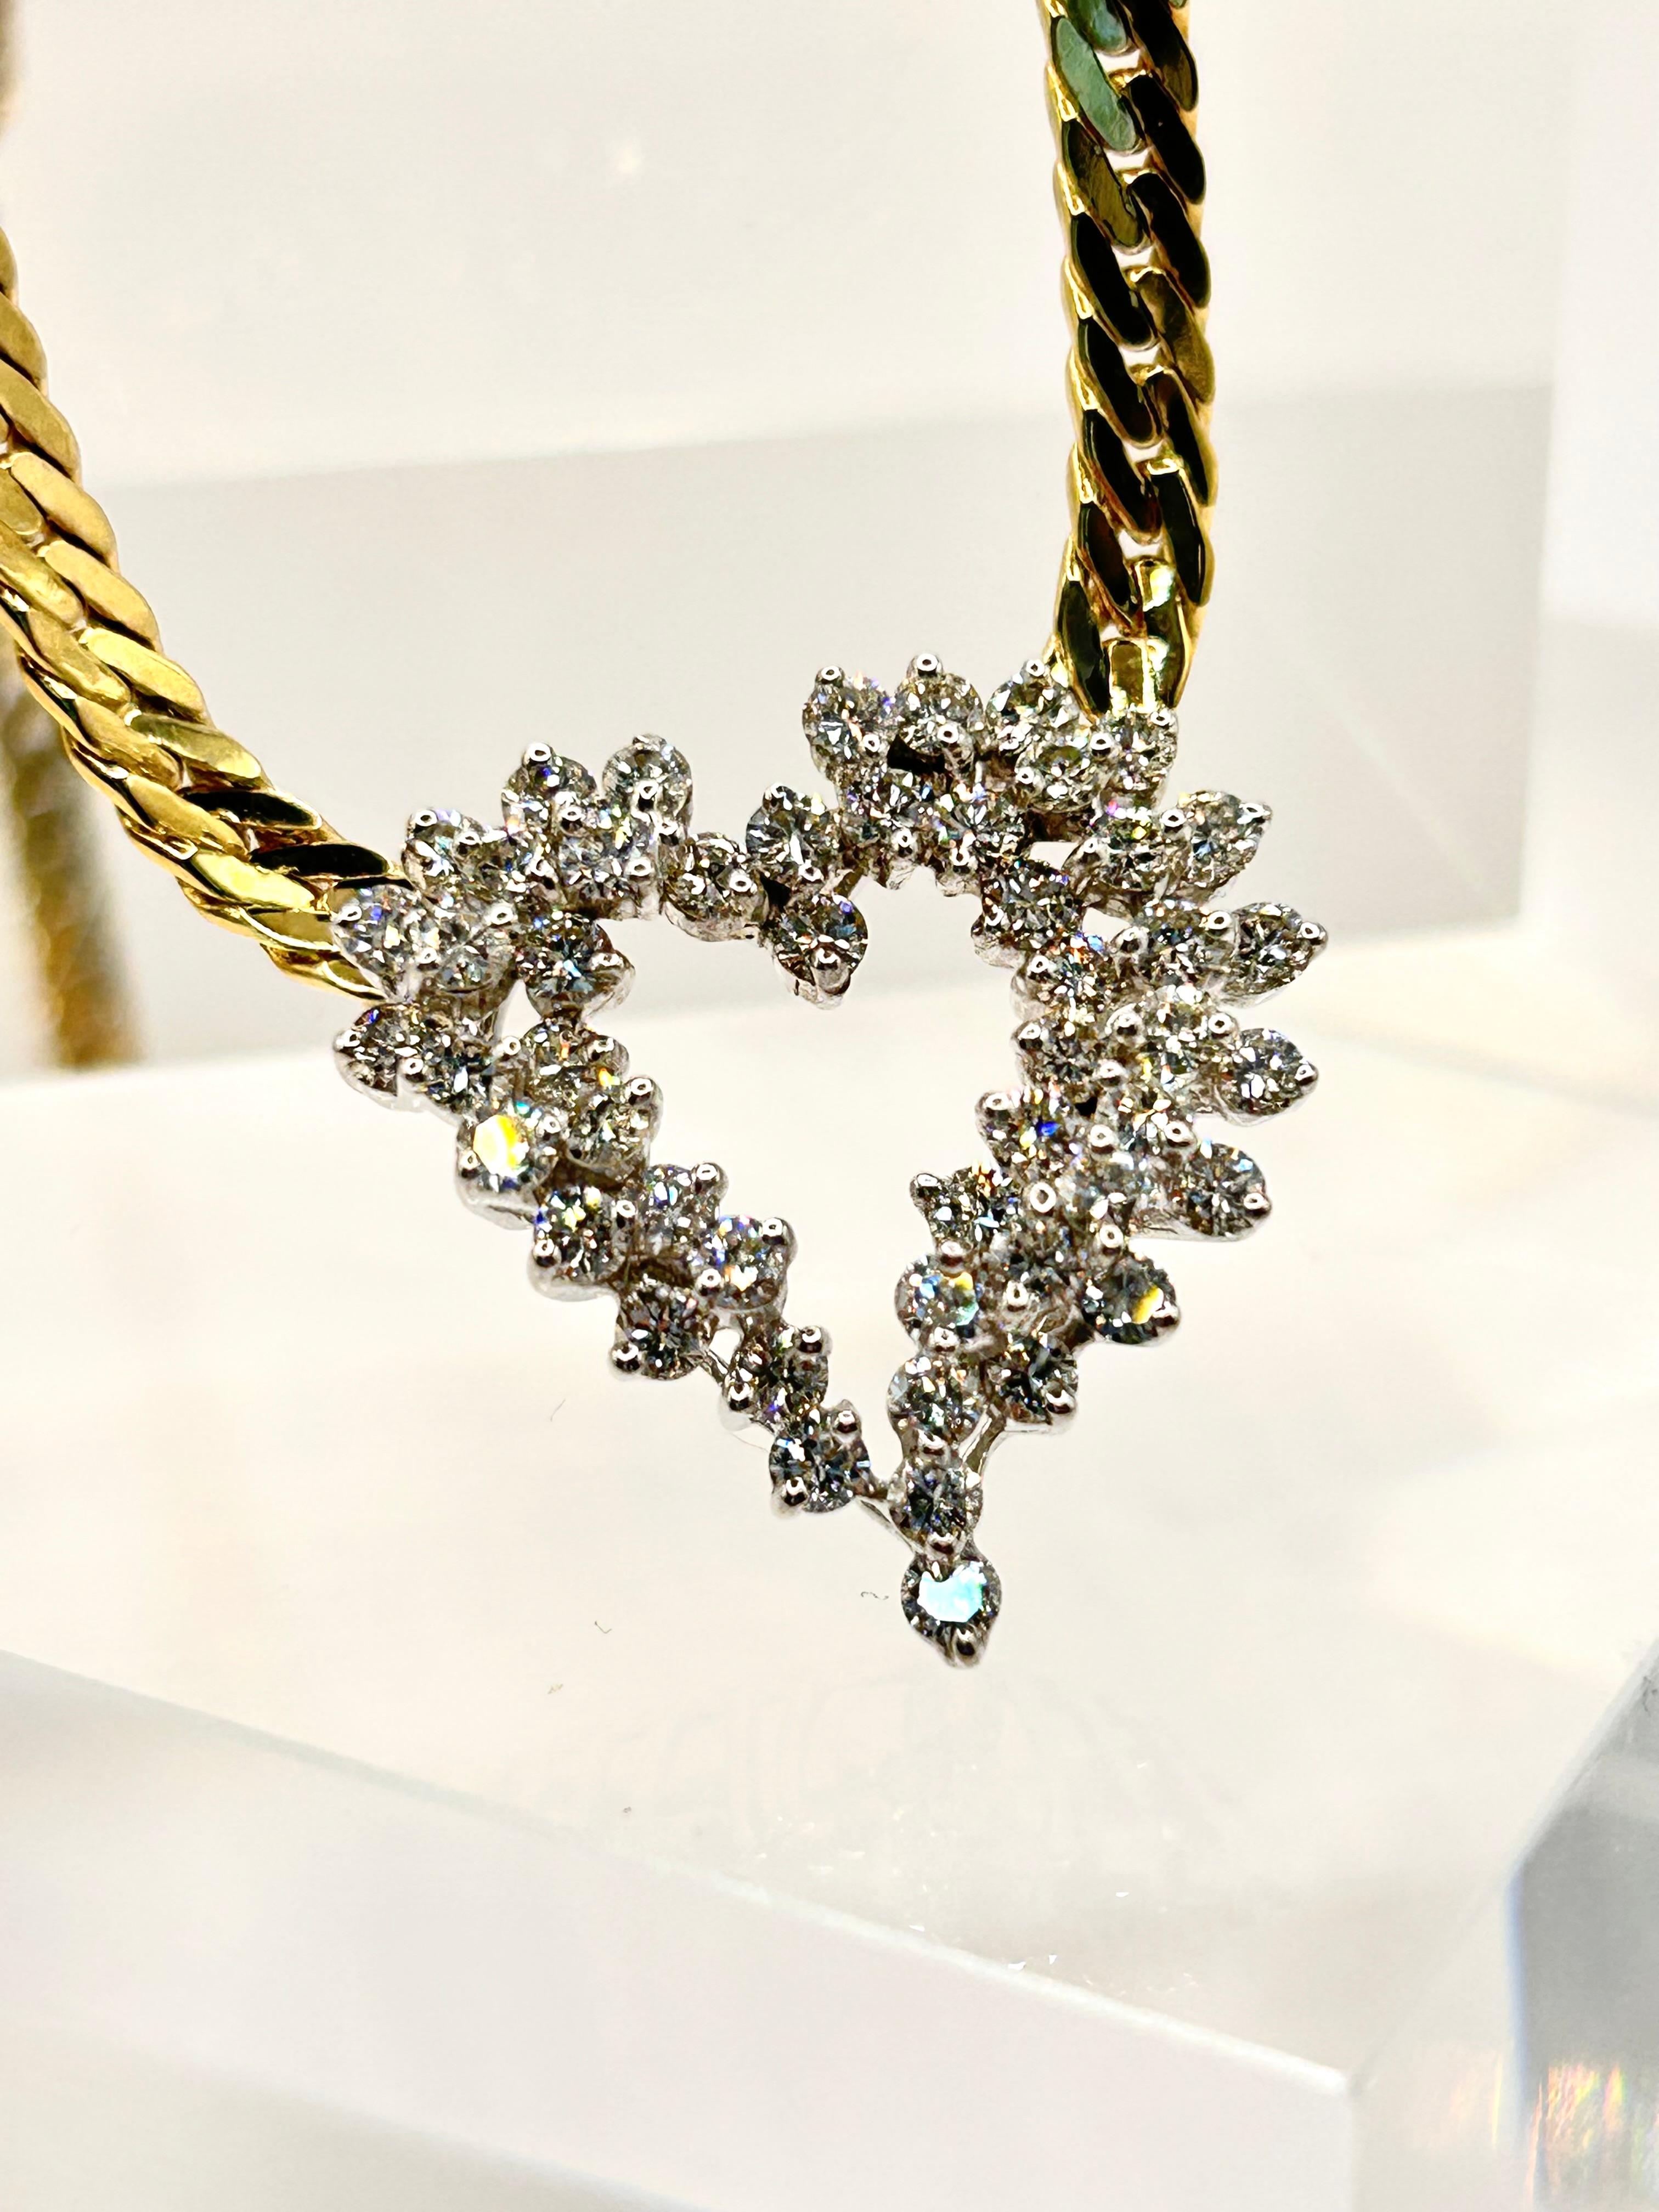 2.50 Carat Total Weight of Round Brilliant Cut Diamonds, set in Heart Design in 14 Karat White Gold attached to 14 Karat Yellow Gold Herringbone Chain.  Average Color of Diamonds is H-I and average Clarity is VS.